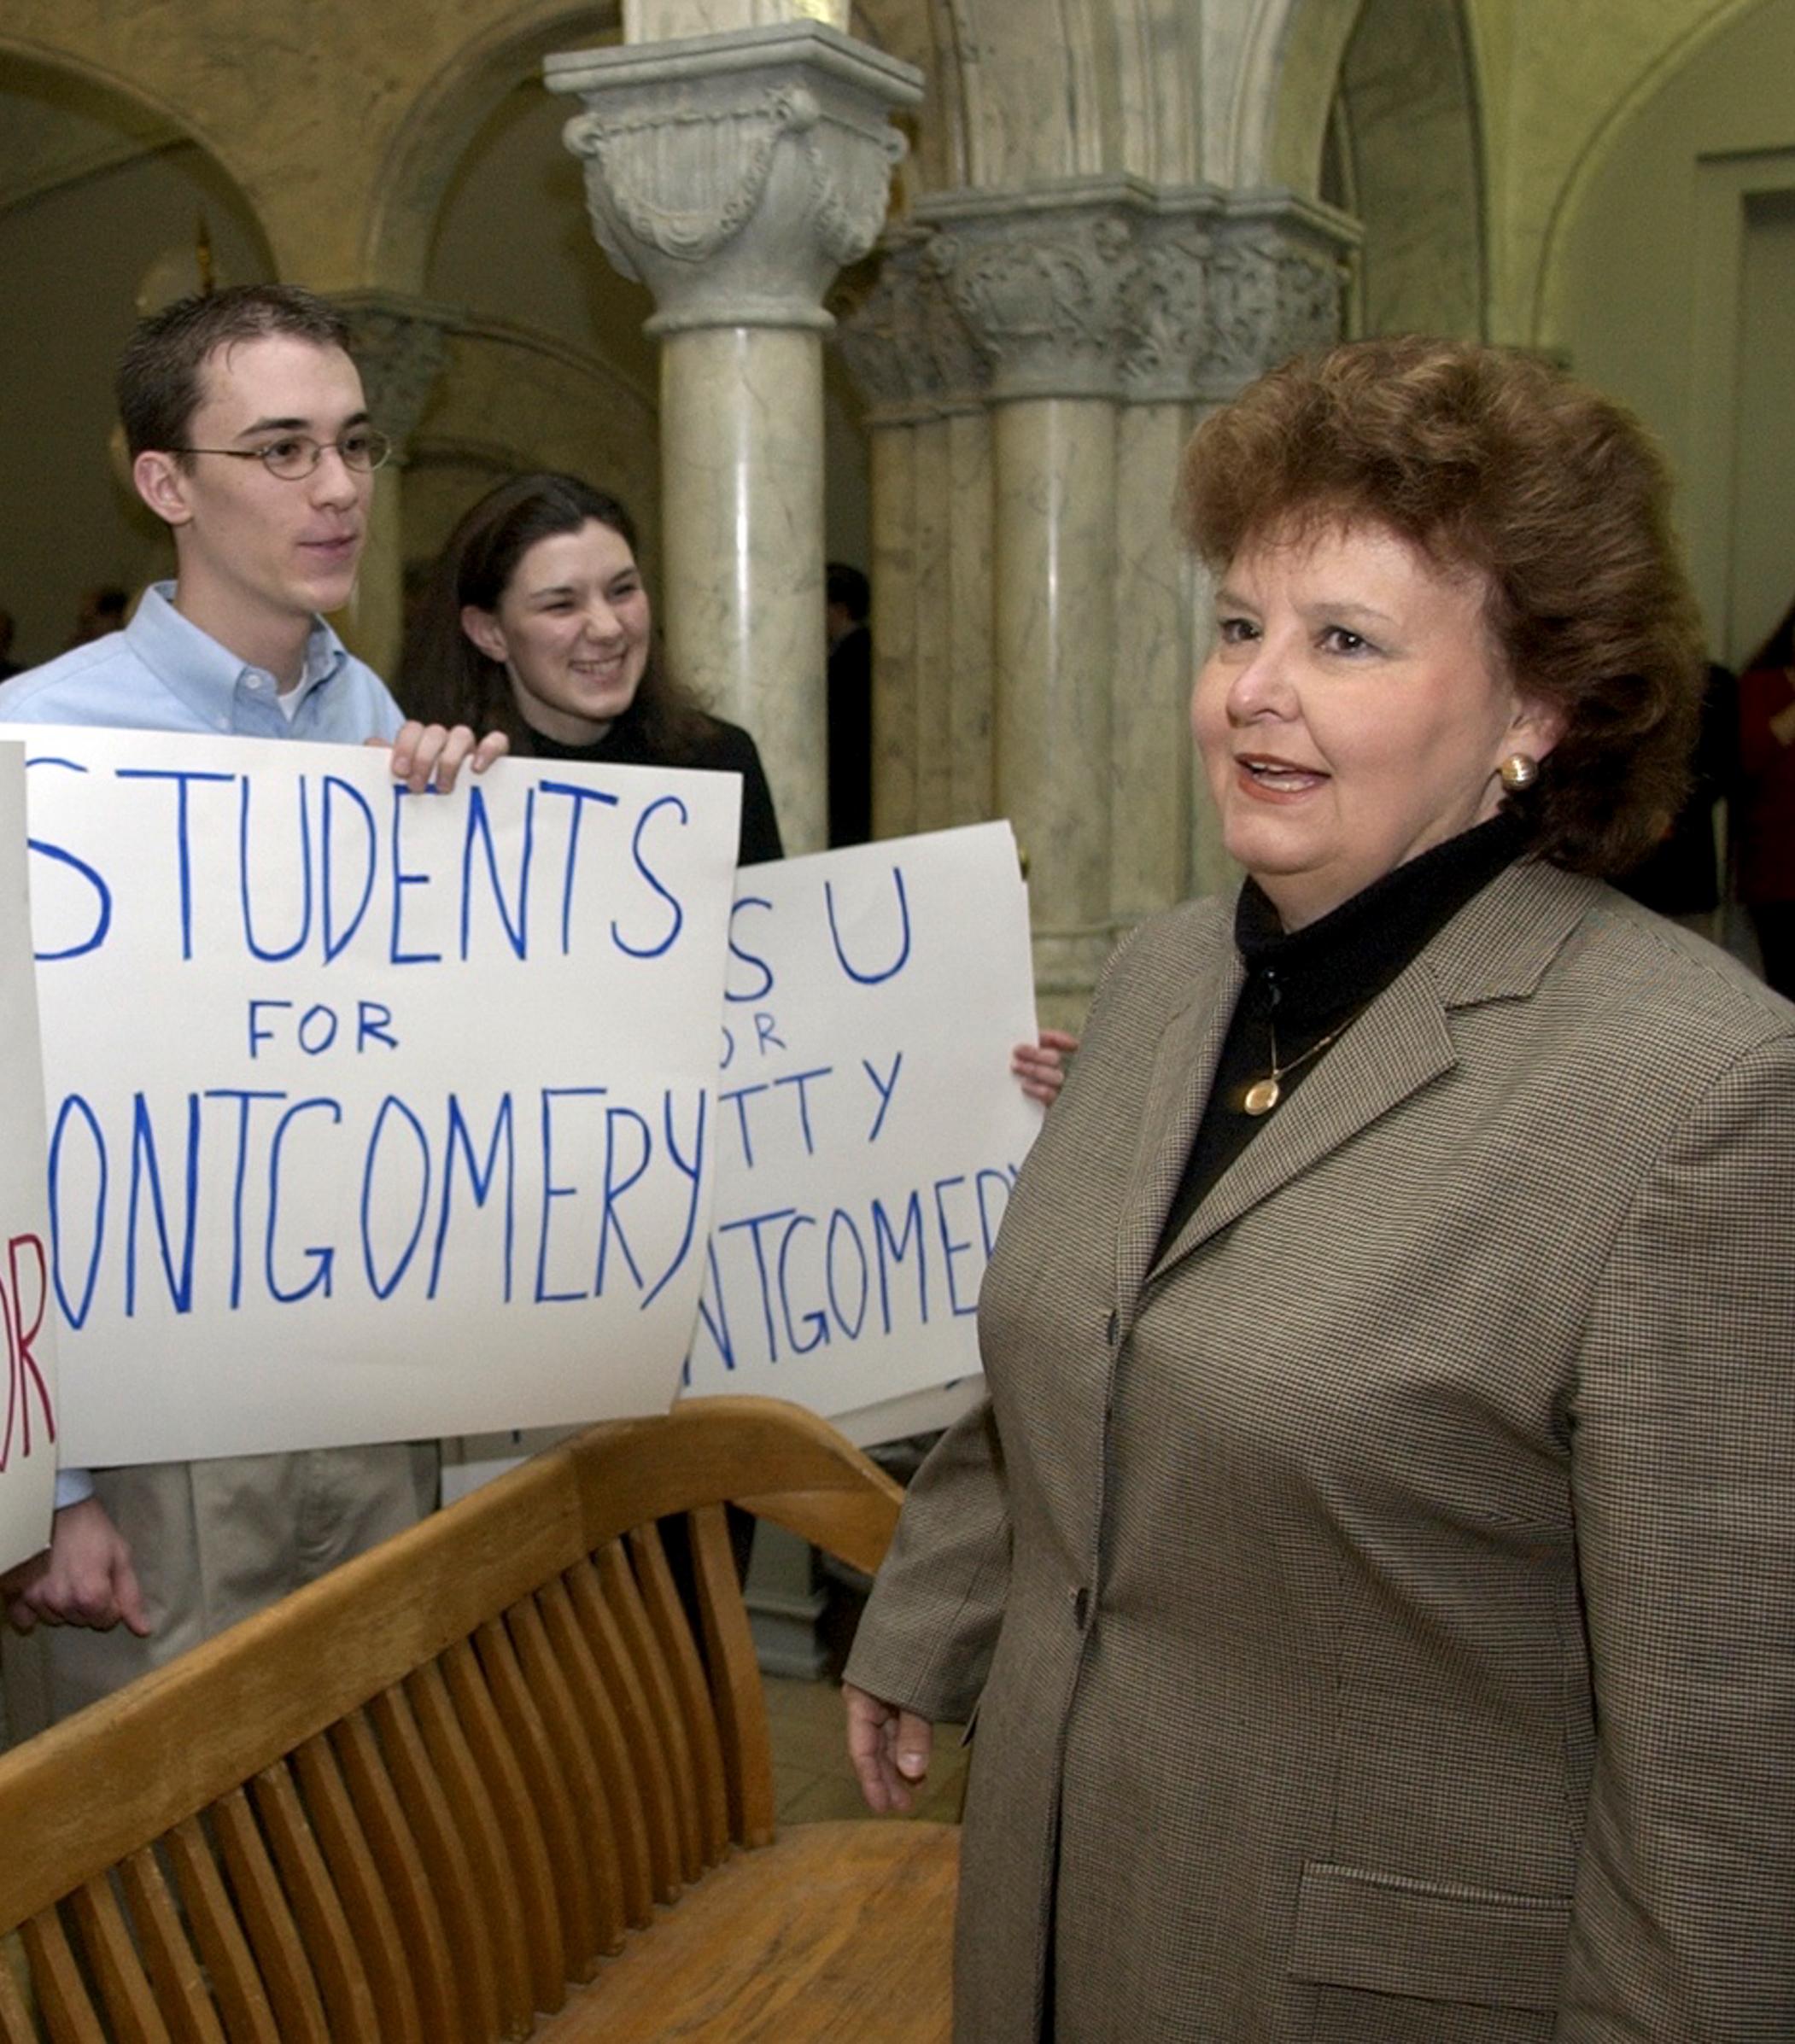 PHOTO-Montgomery-2002-3-5-students-holding-signs-MERLIN-221571-cropped